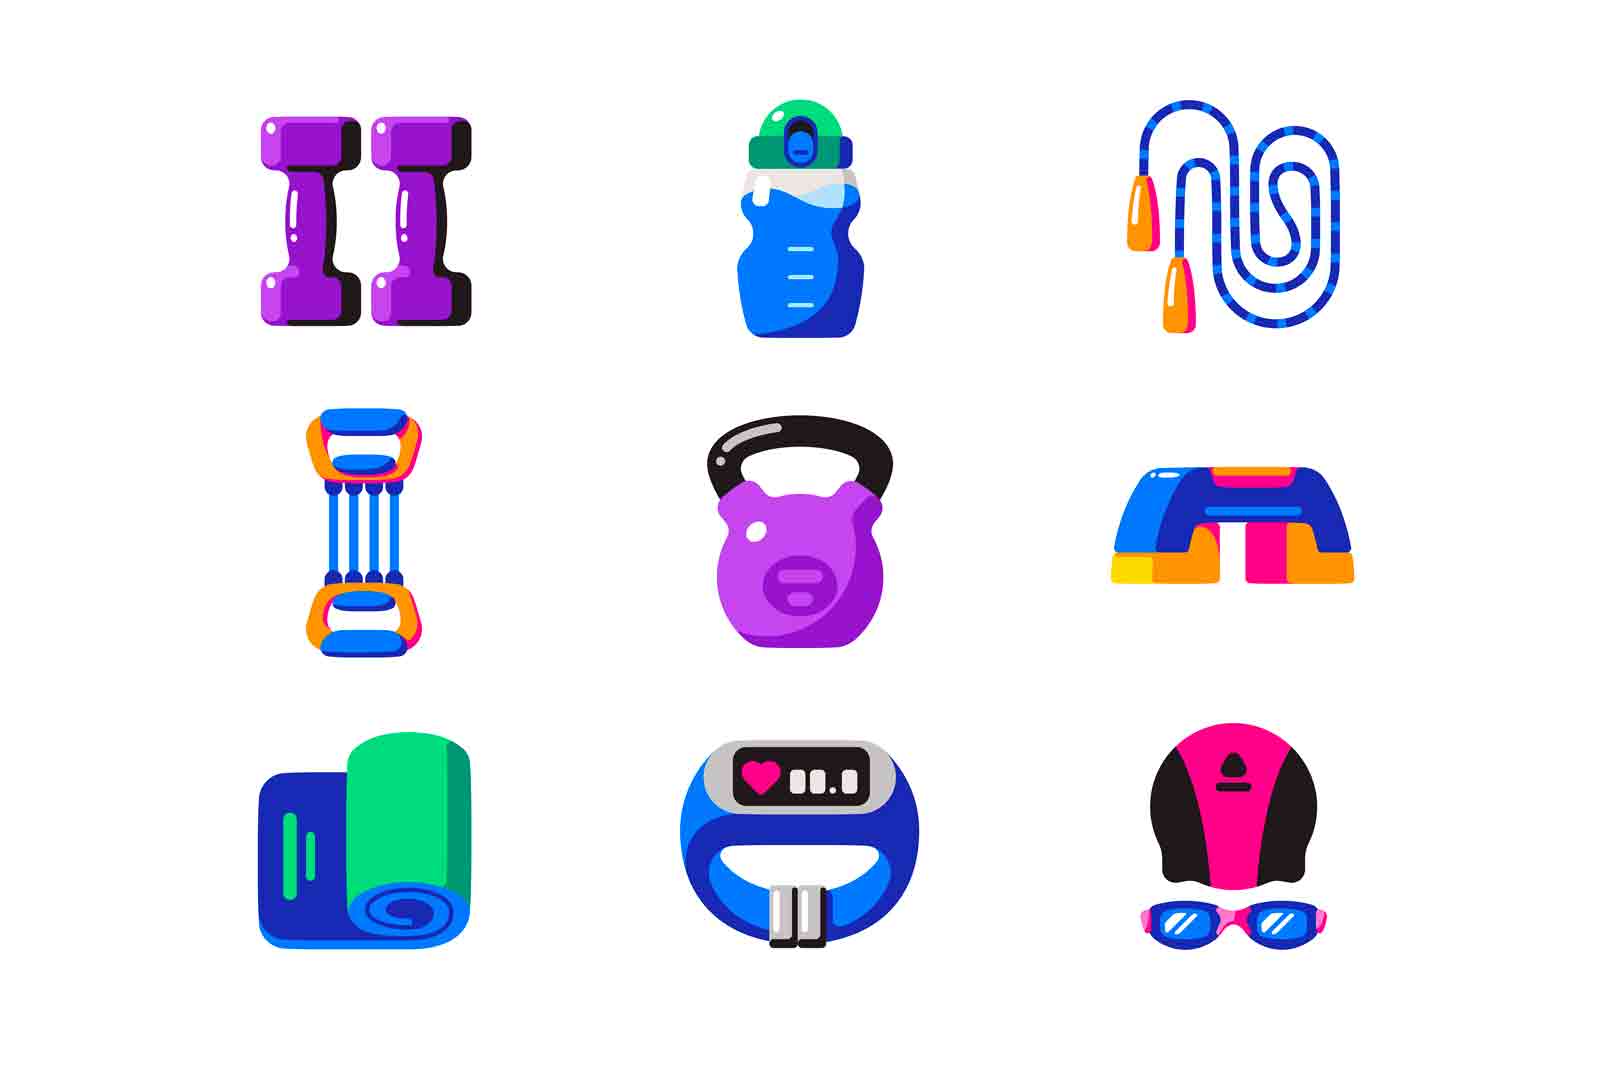 Sport or fitness workout equipment icons set vector illustration. Training accessories and fitness devices for active lifestyle flat concept